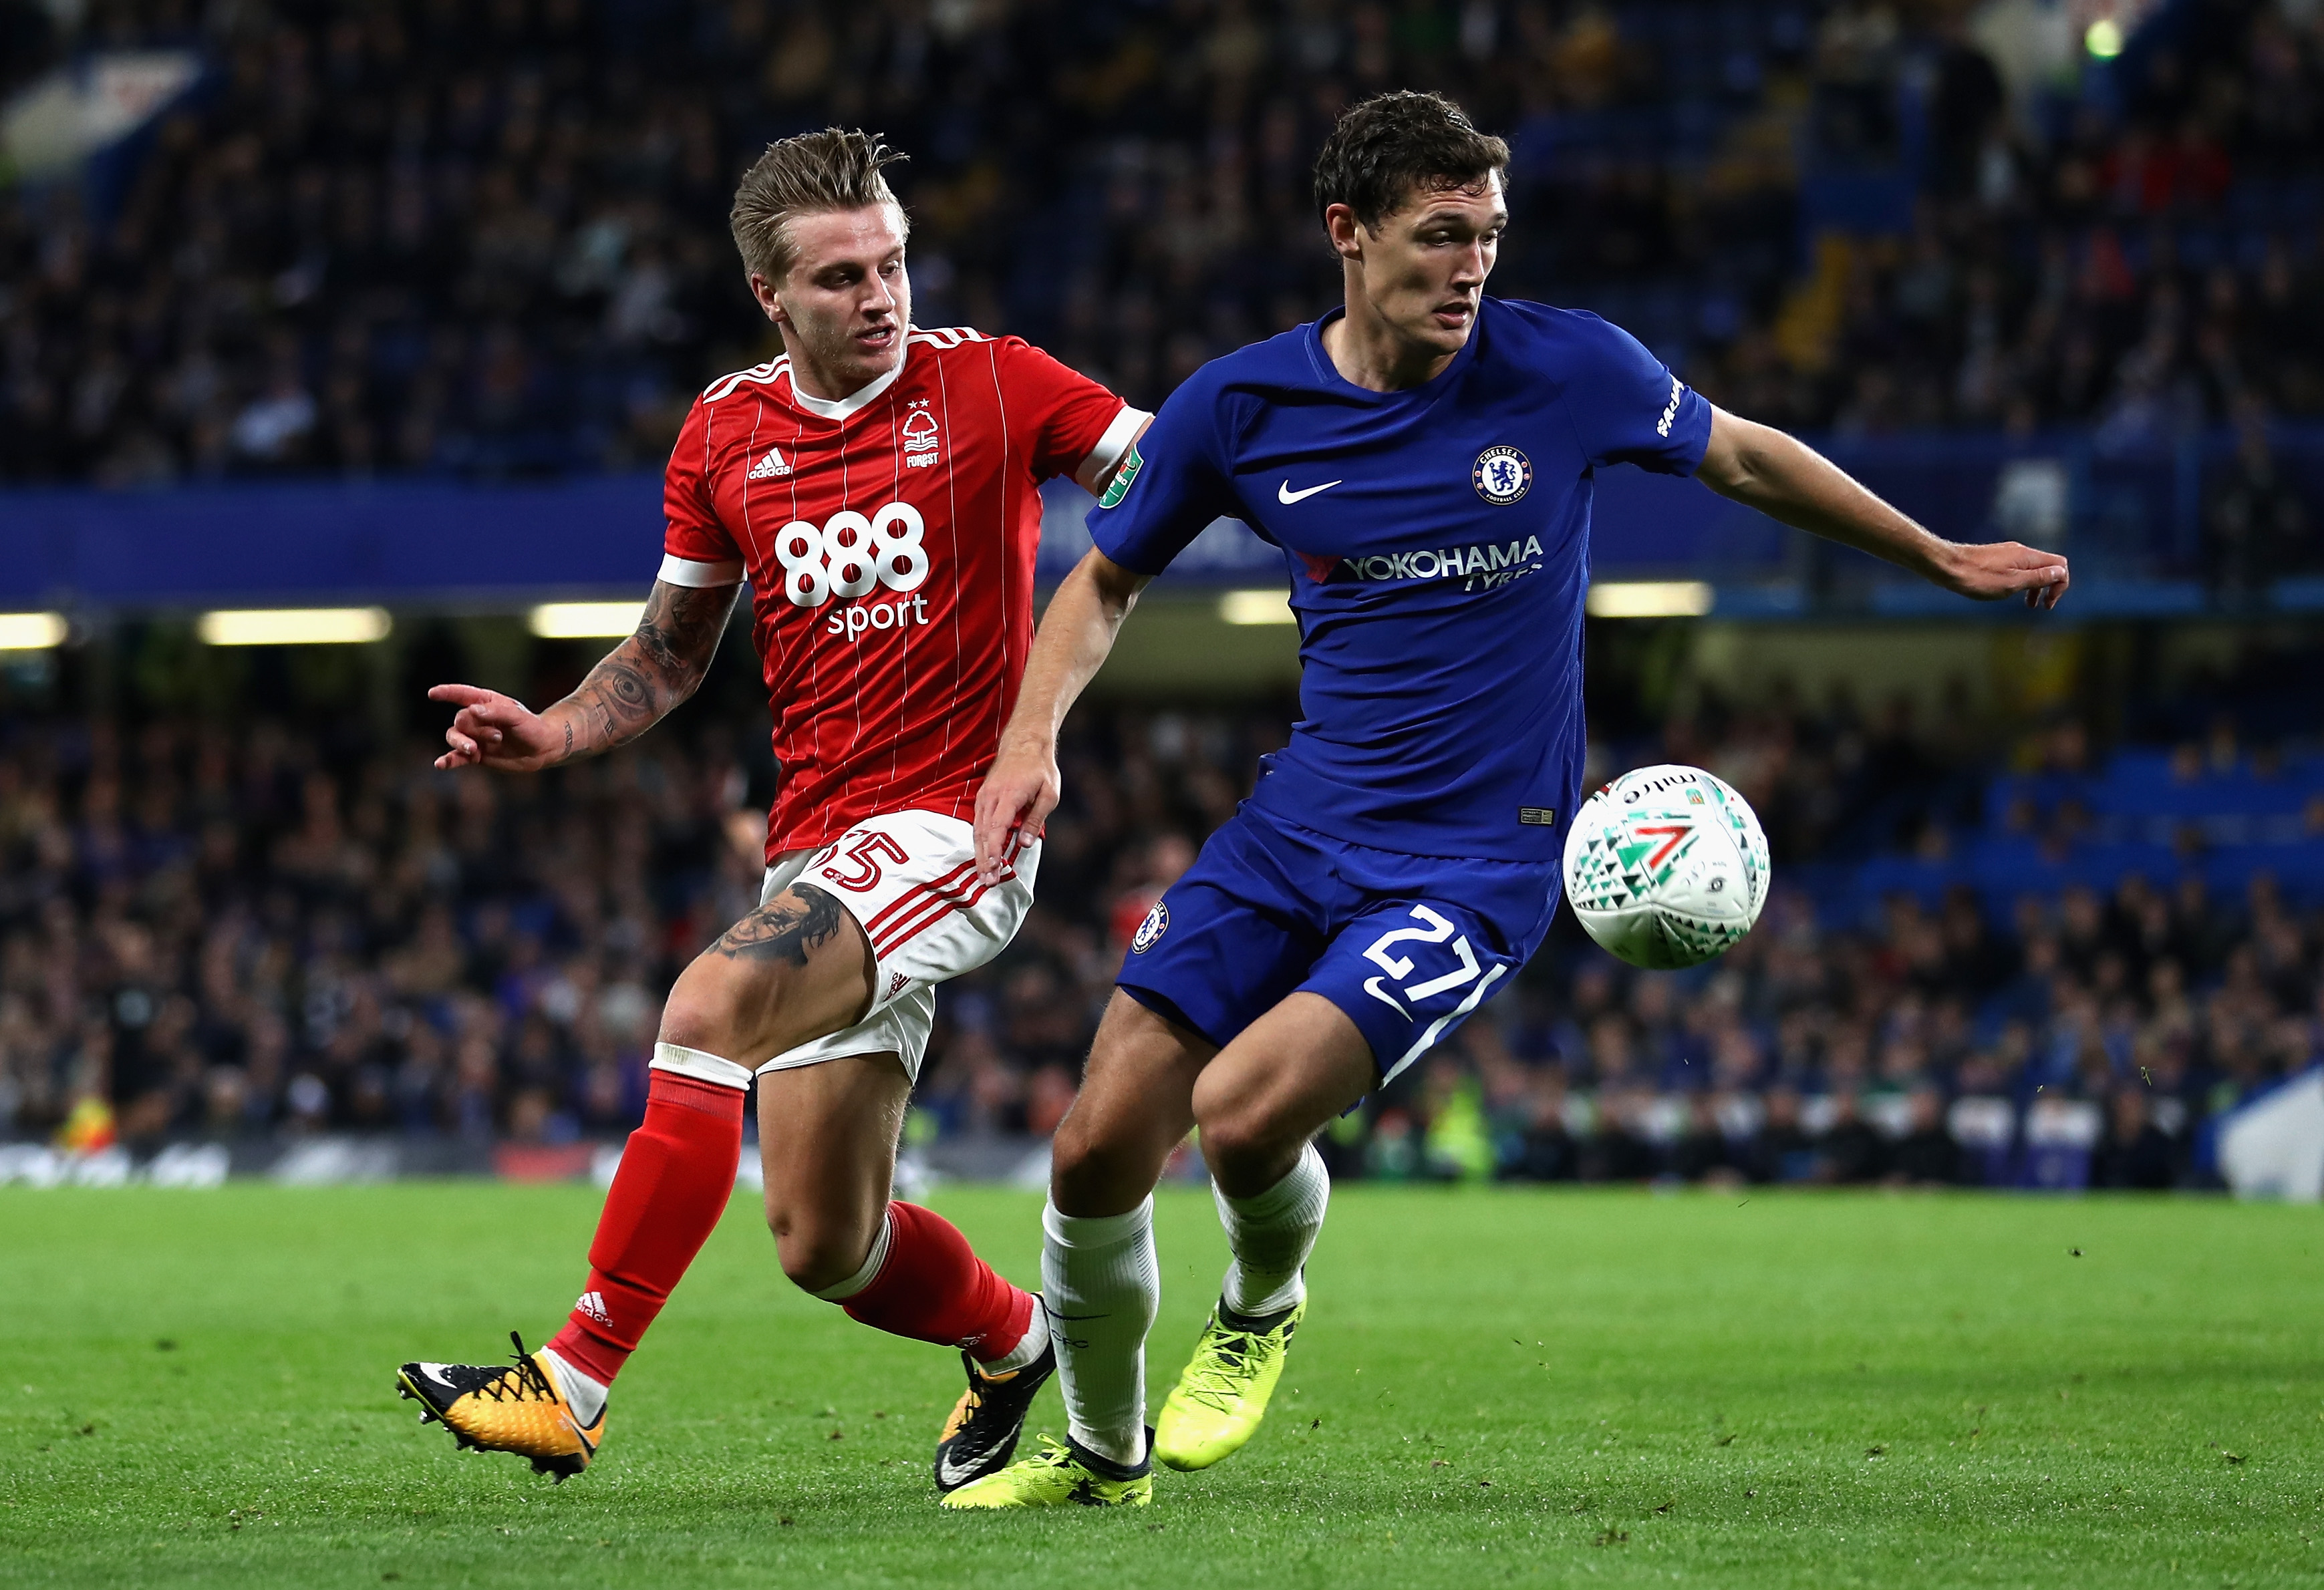 LONDON, ENGLAND - SEPTEMBER 20:  Jason Cummings of Nottingham Forest puts pressure on Andreas Christensen of Chelsea during the Carabao Cup Third Round match between Chelsea and Nottingham Forest at Stamford Bridge on September 19, 2017 in London, England.  (Photo by Bryn Lennon/Getty Images)